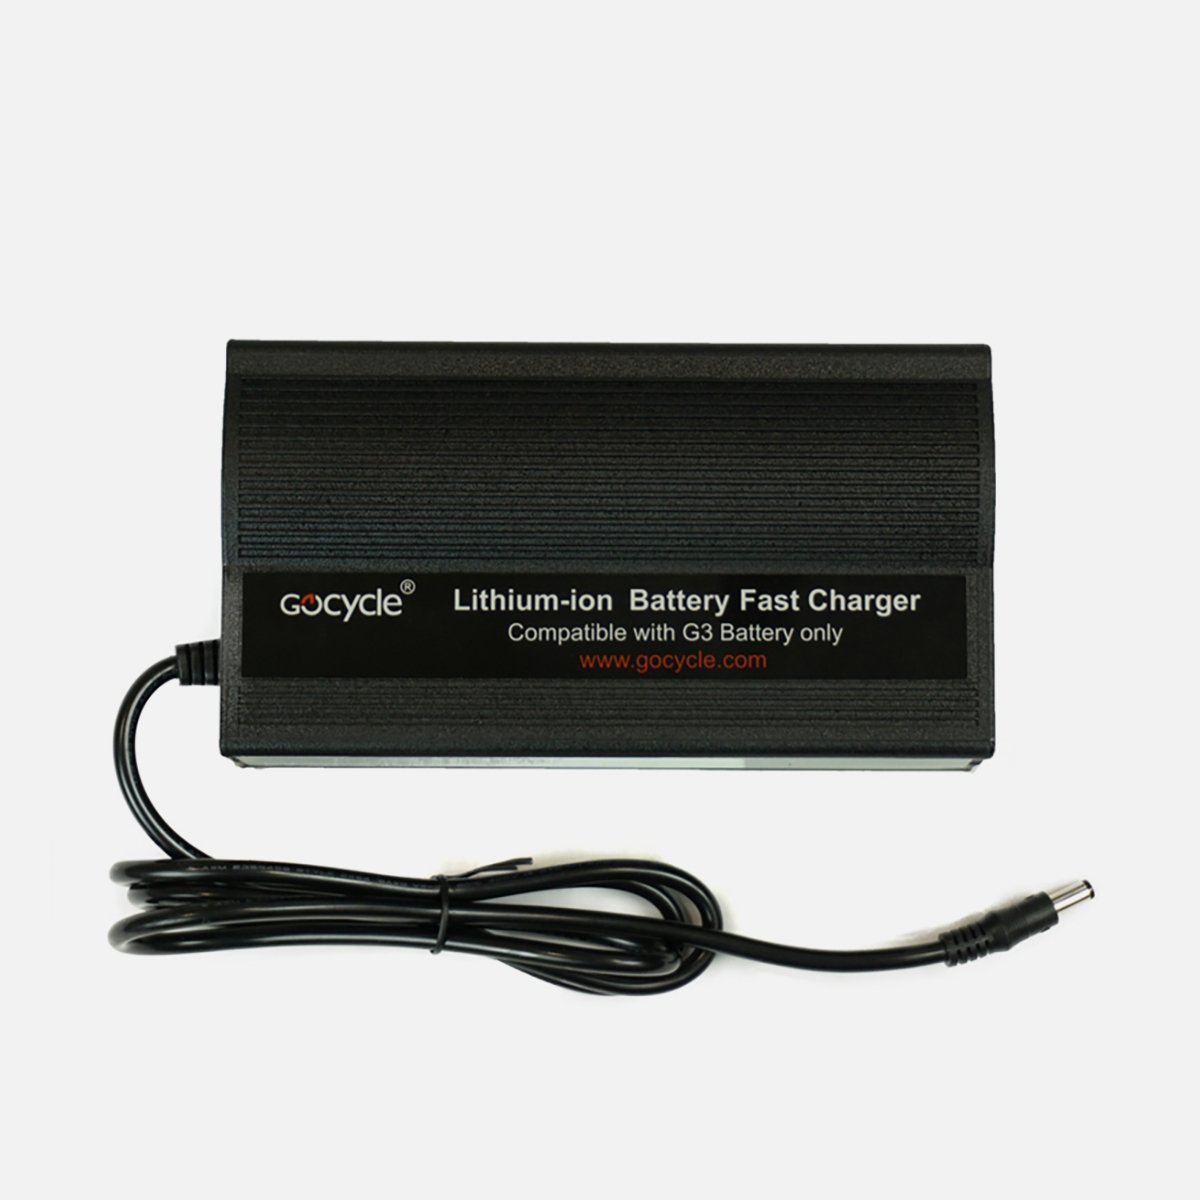 Gocycle Battery Fast Charger - 4Amp